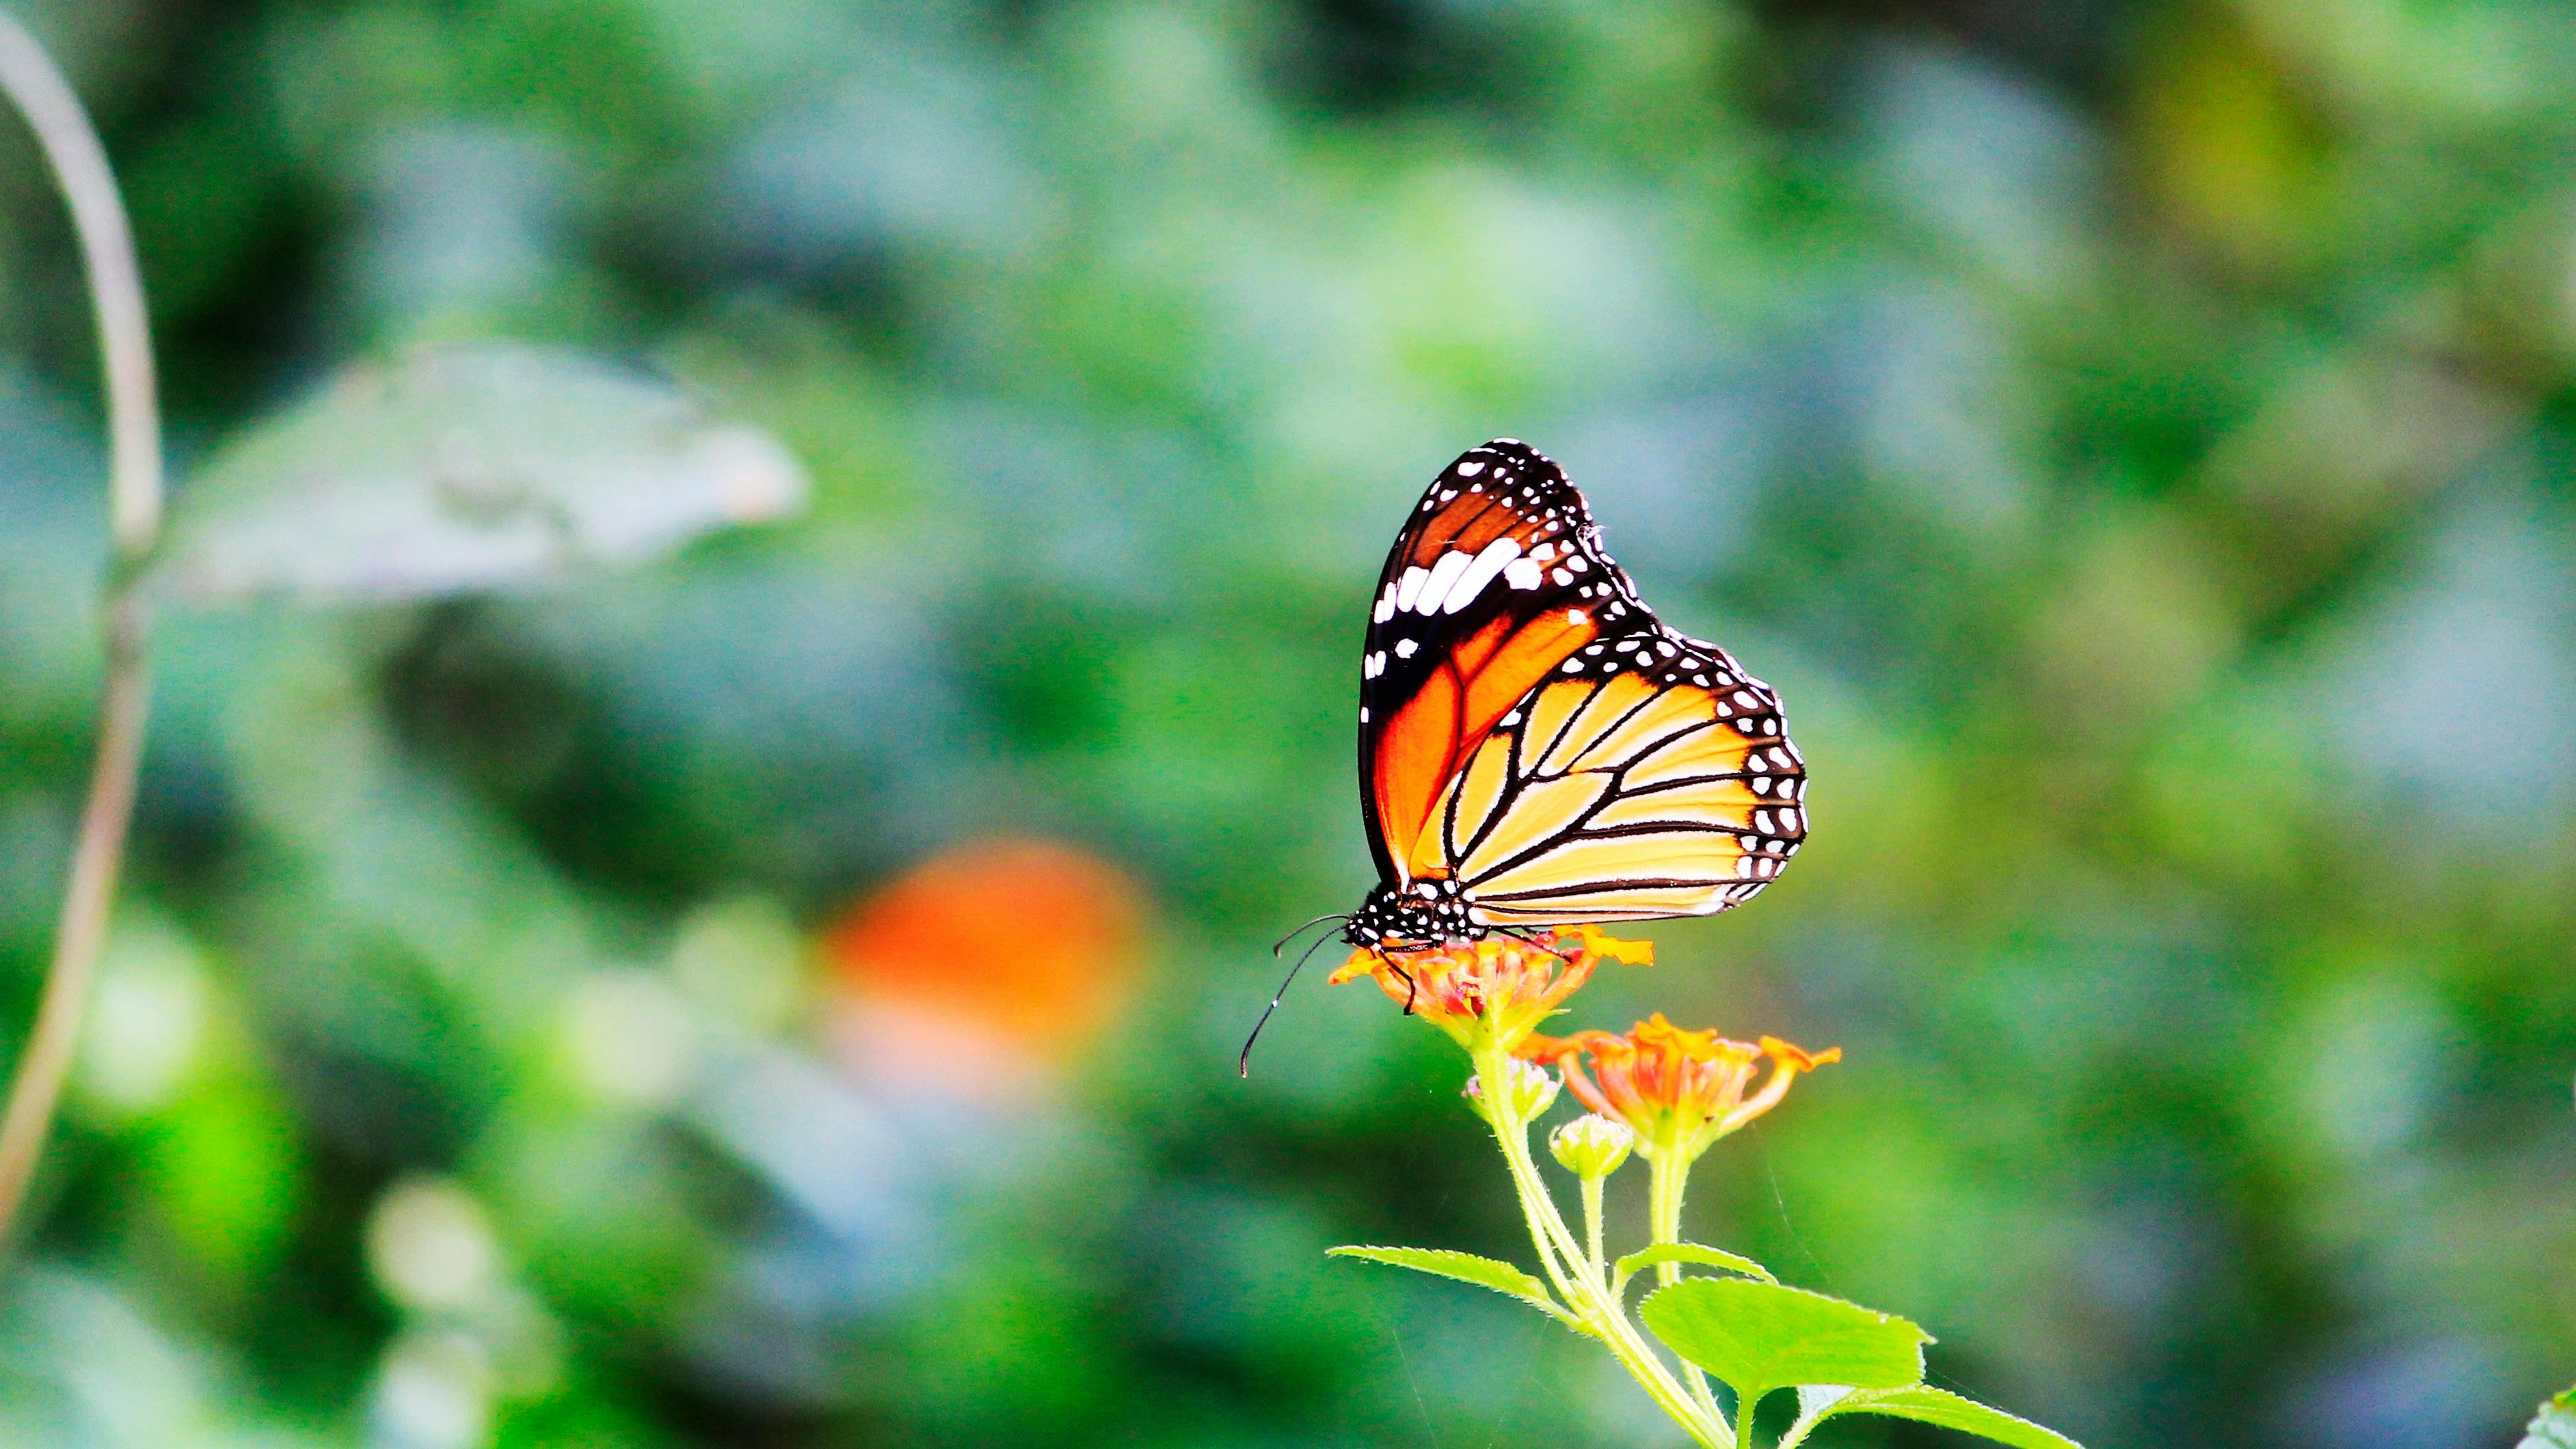 Free stock photo of #monarchbutterfly, The butterfly is a flying flower., The flower a tethered butterfly.